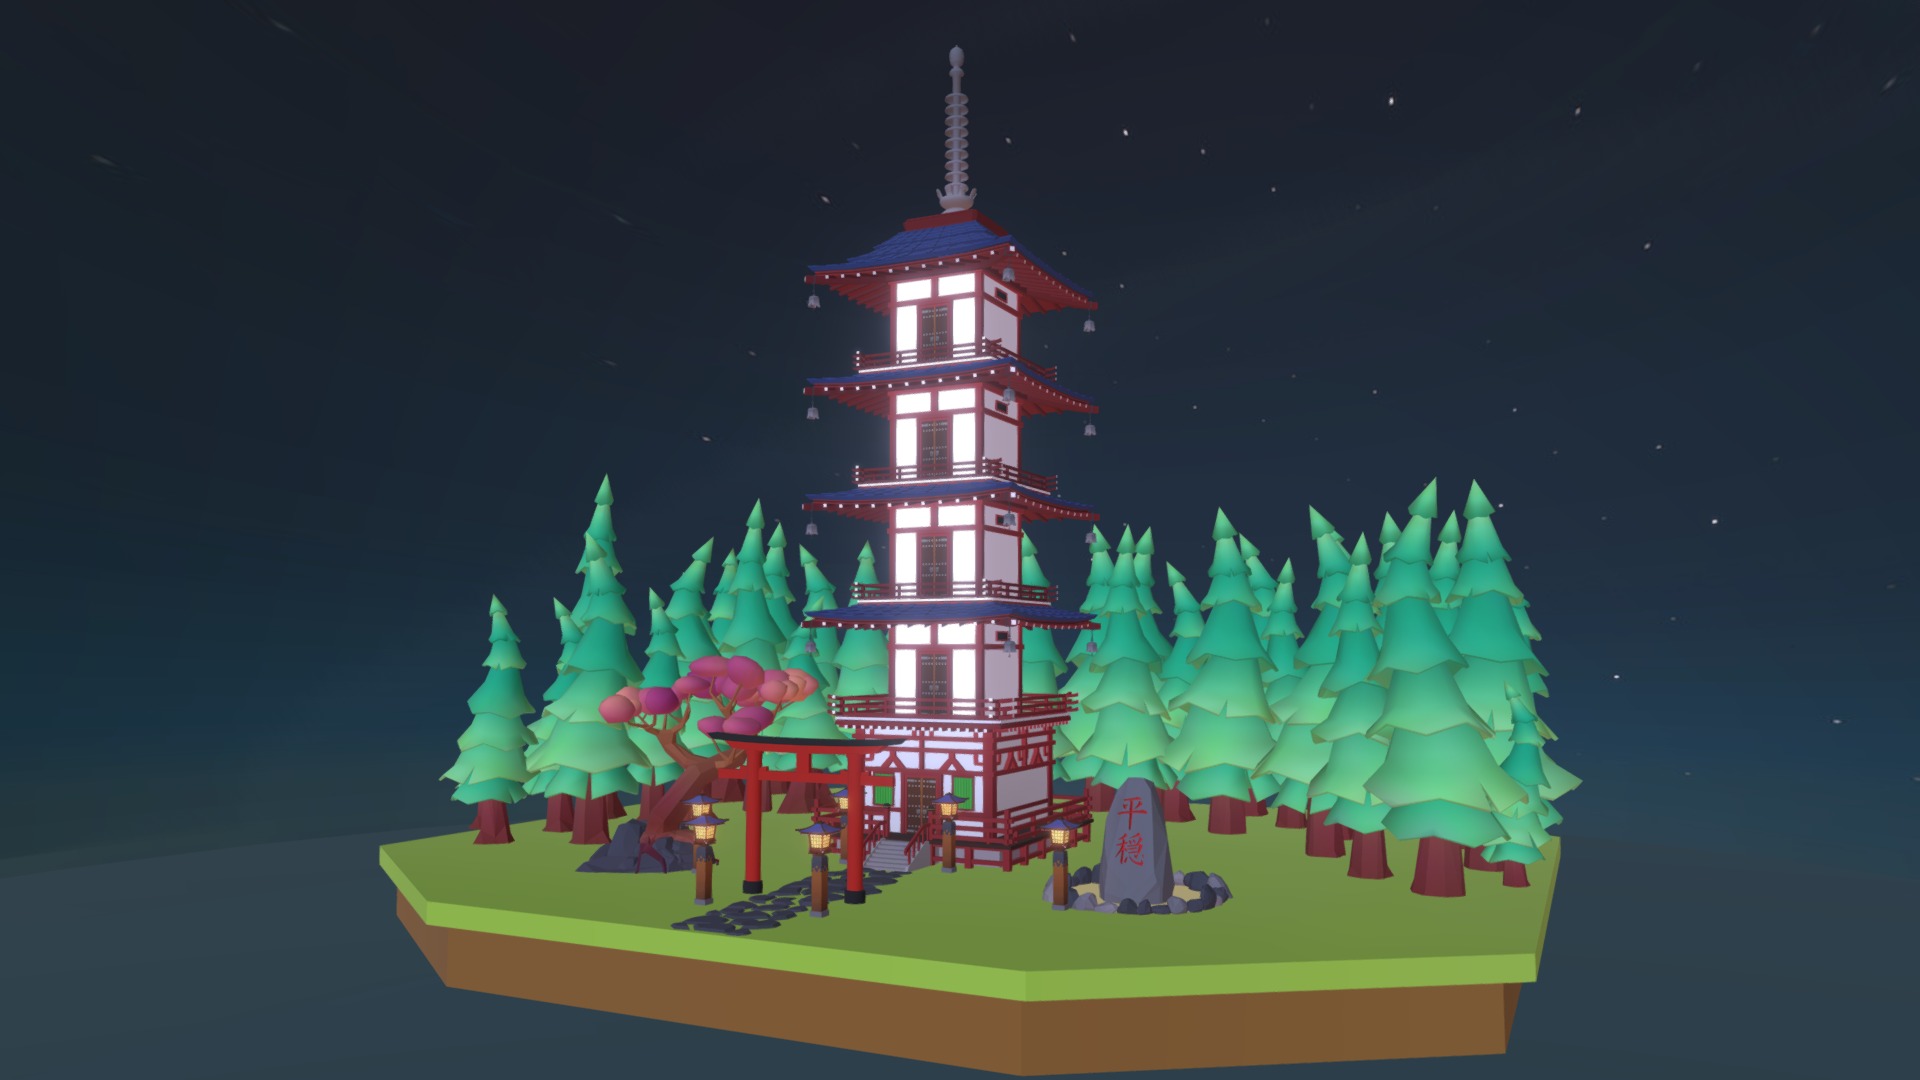 3D model Templo Japones – Japanese Temple - This is a 3D model of the Templo Japones - Japanese Temple. The 3D model is about a colorful toy house.